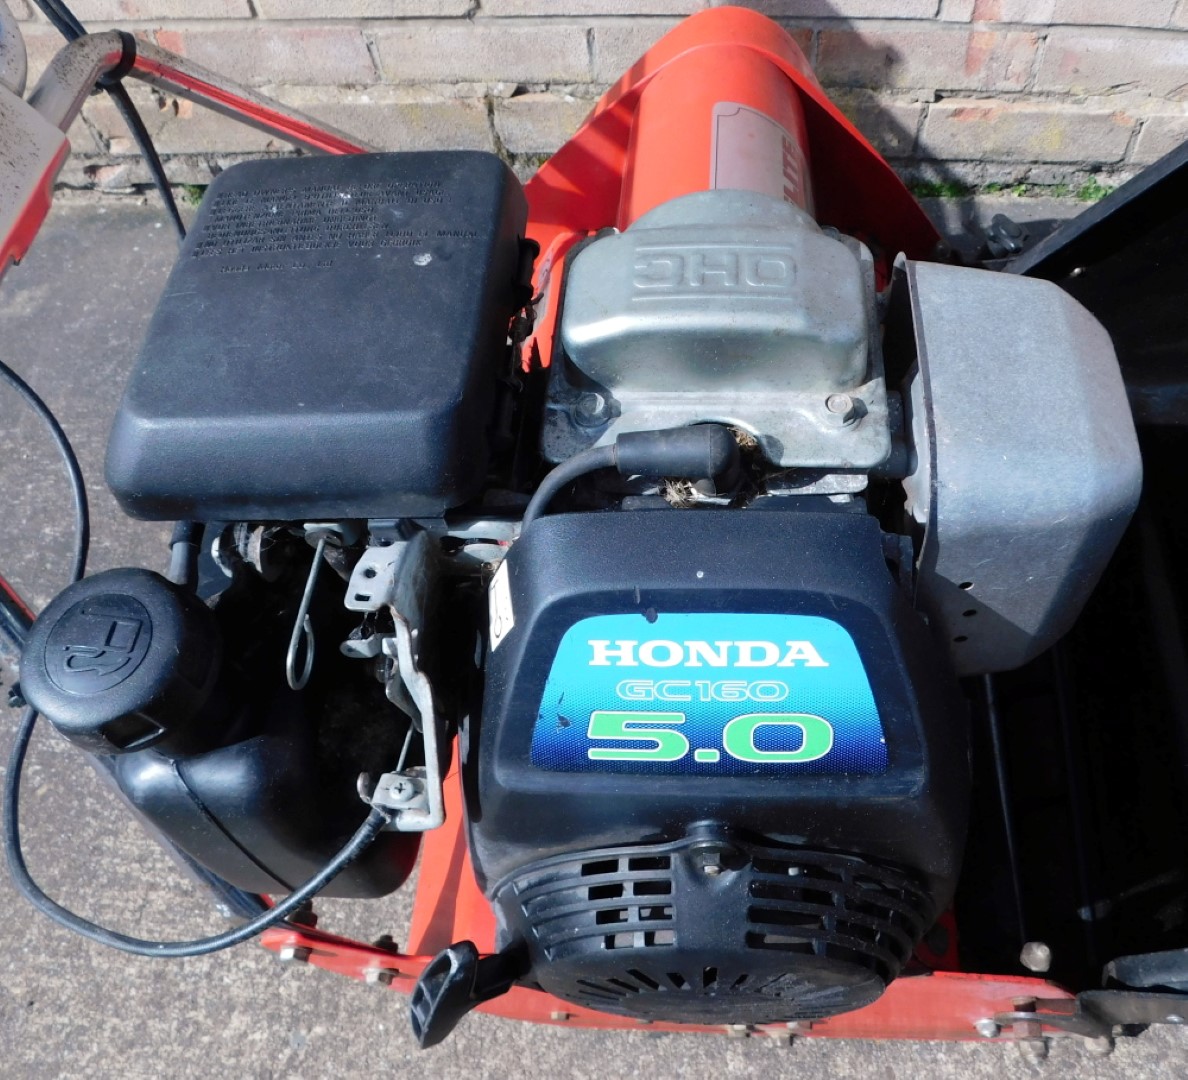 A Lawnflite Pro cylinder mower, with Honda GC160 5.0 engine. - Image 2 of 4